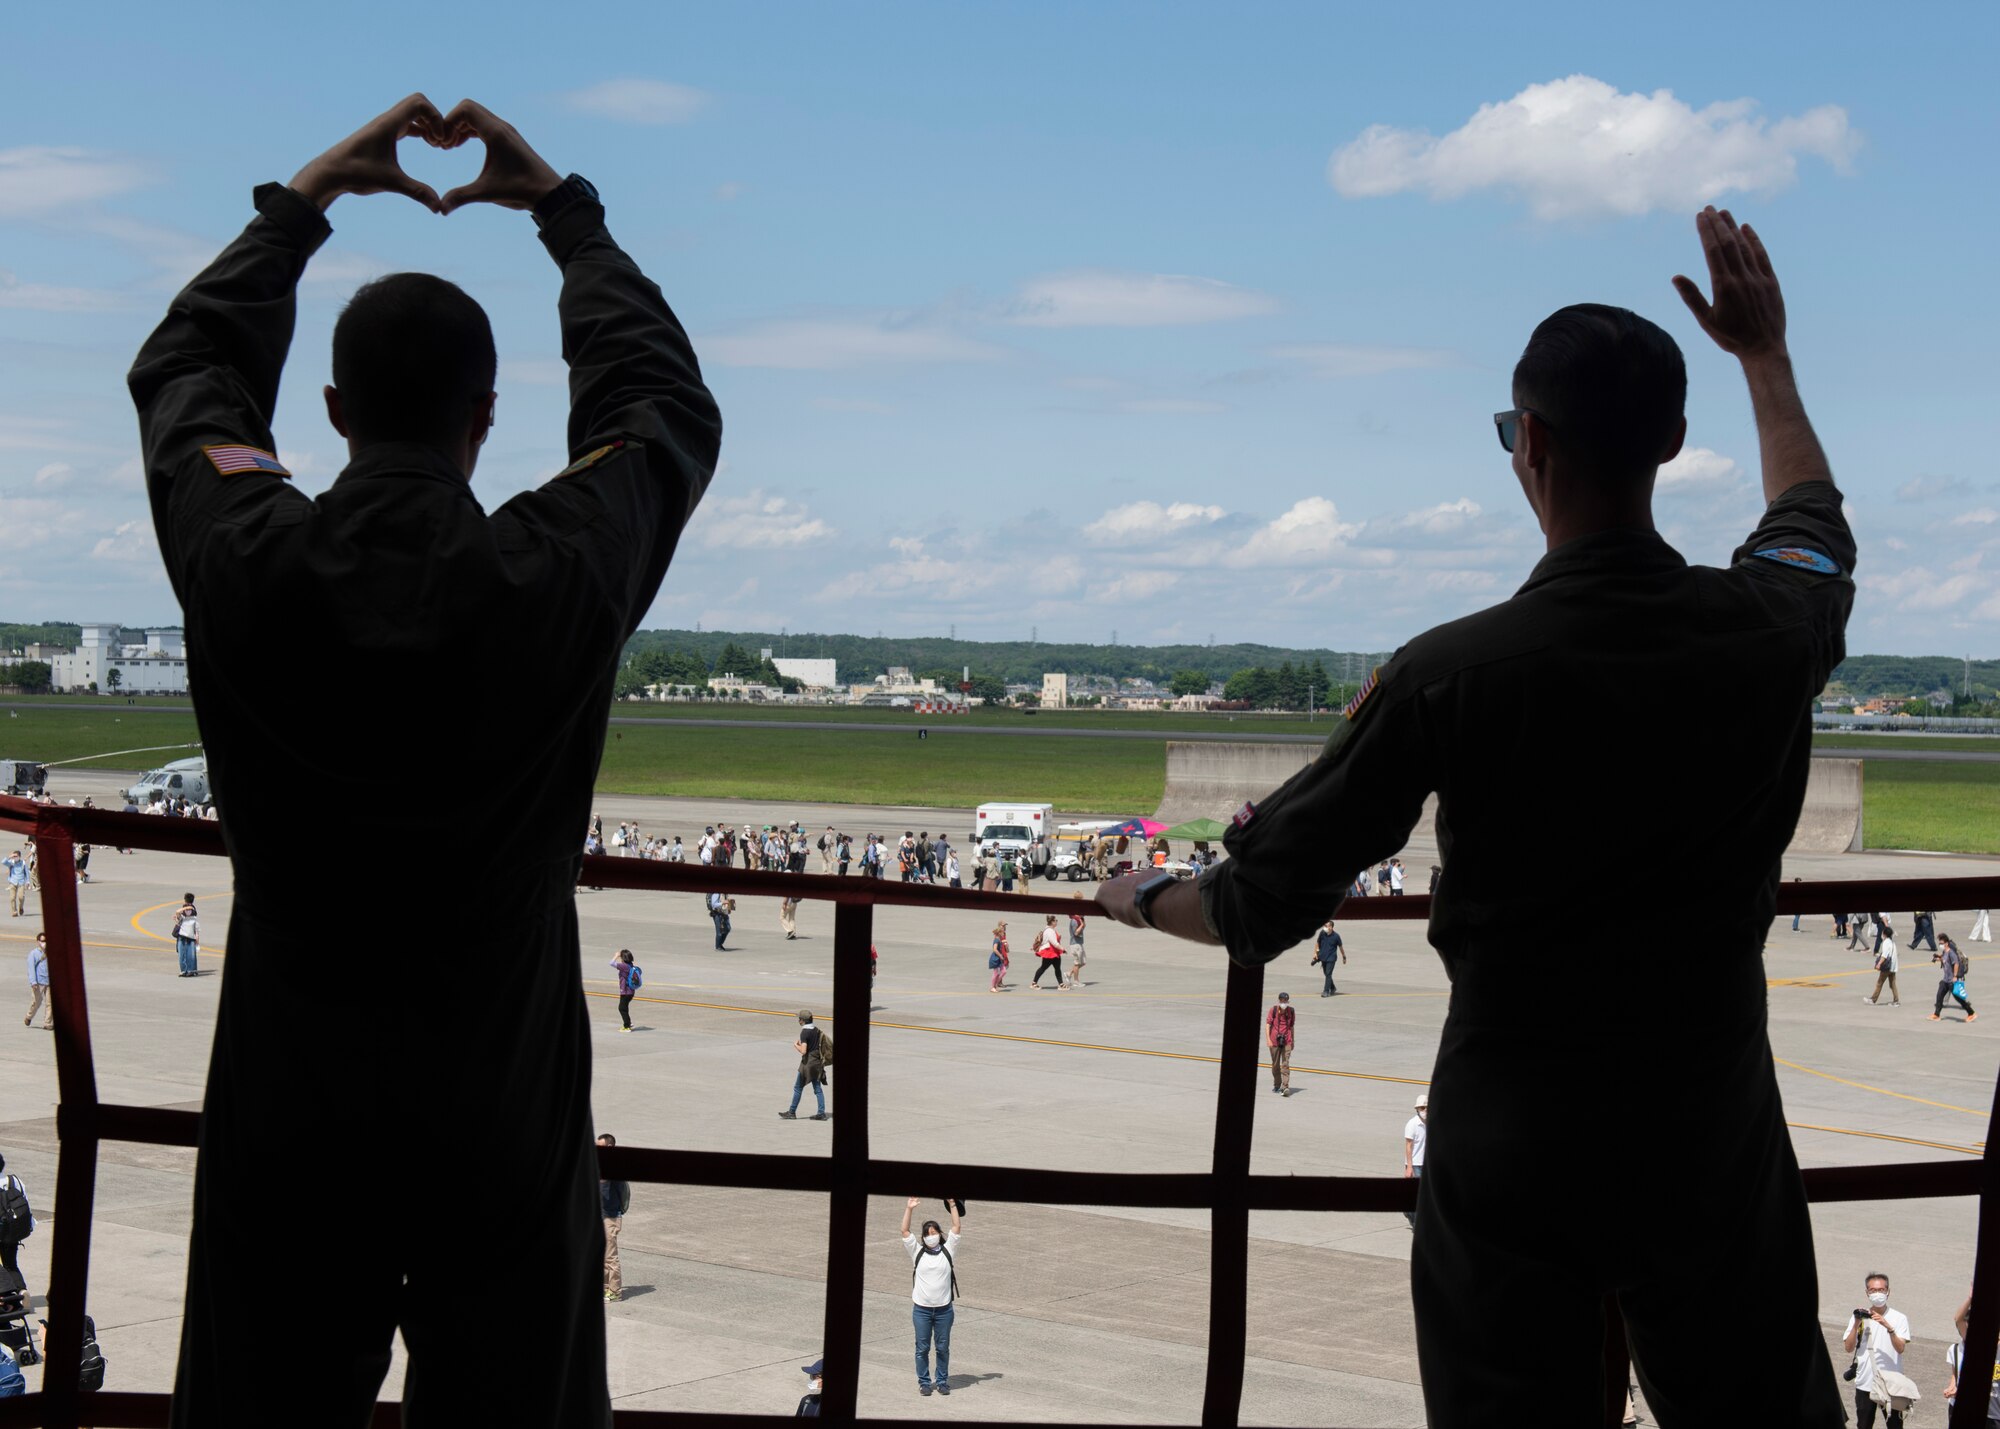 Airman 1st Class Robert Carswell, 9th Air Refueling Squadron flight engineer, left, and 1st Lt. Nathan Tomlin, 9th Air Refueling Squadron KC-10 pilot, wave to attendees during Friendship Festival 2022, at Yokota Air Base, Japan, May 22. The two-day festival was an opportunity for visitors to learn more about the U.S. and Japan bilateral partnership, while strengthening the bonds between Yokota and the local communities. Yokota was able to host the event with the support of Japan Self-Defense Force, sister services and the local community. (U.S. Air Force photo by Machiko Arita)